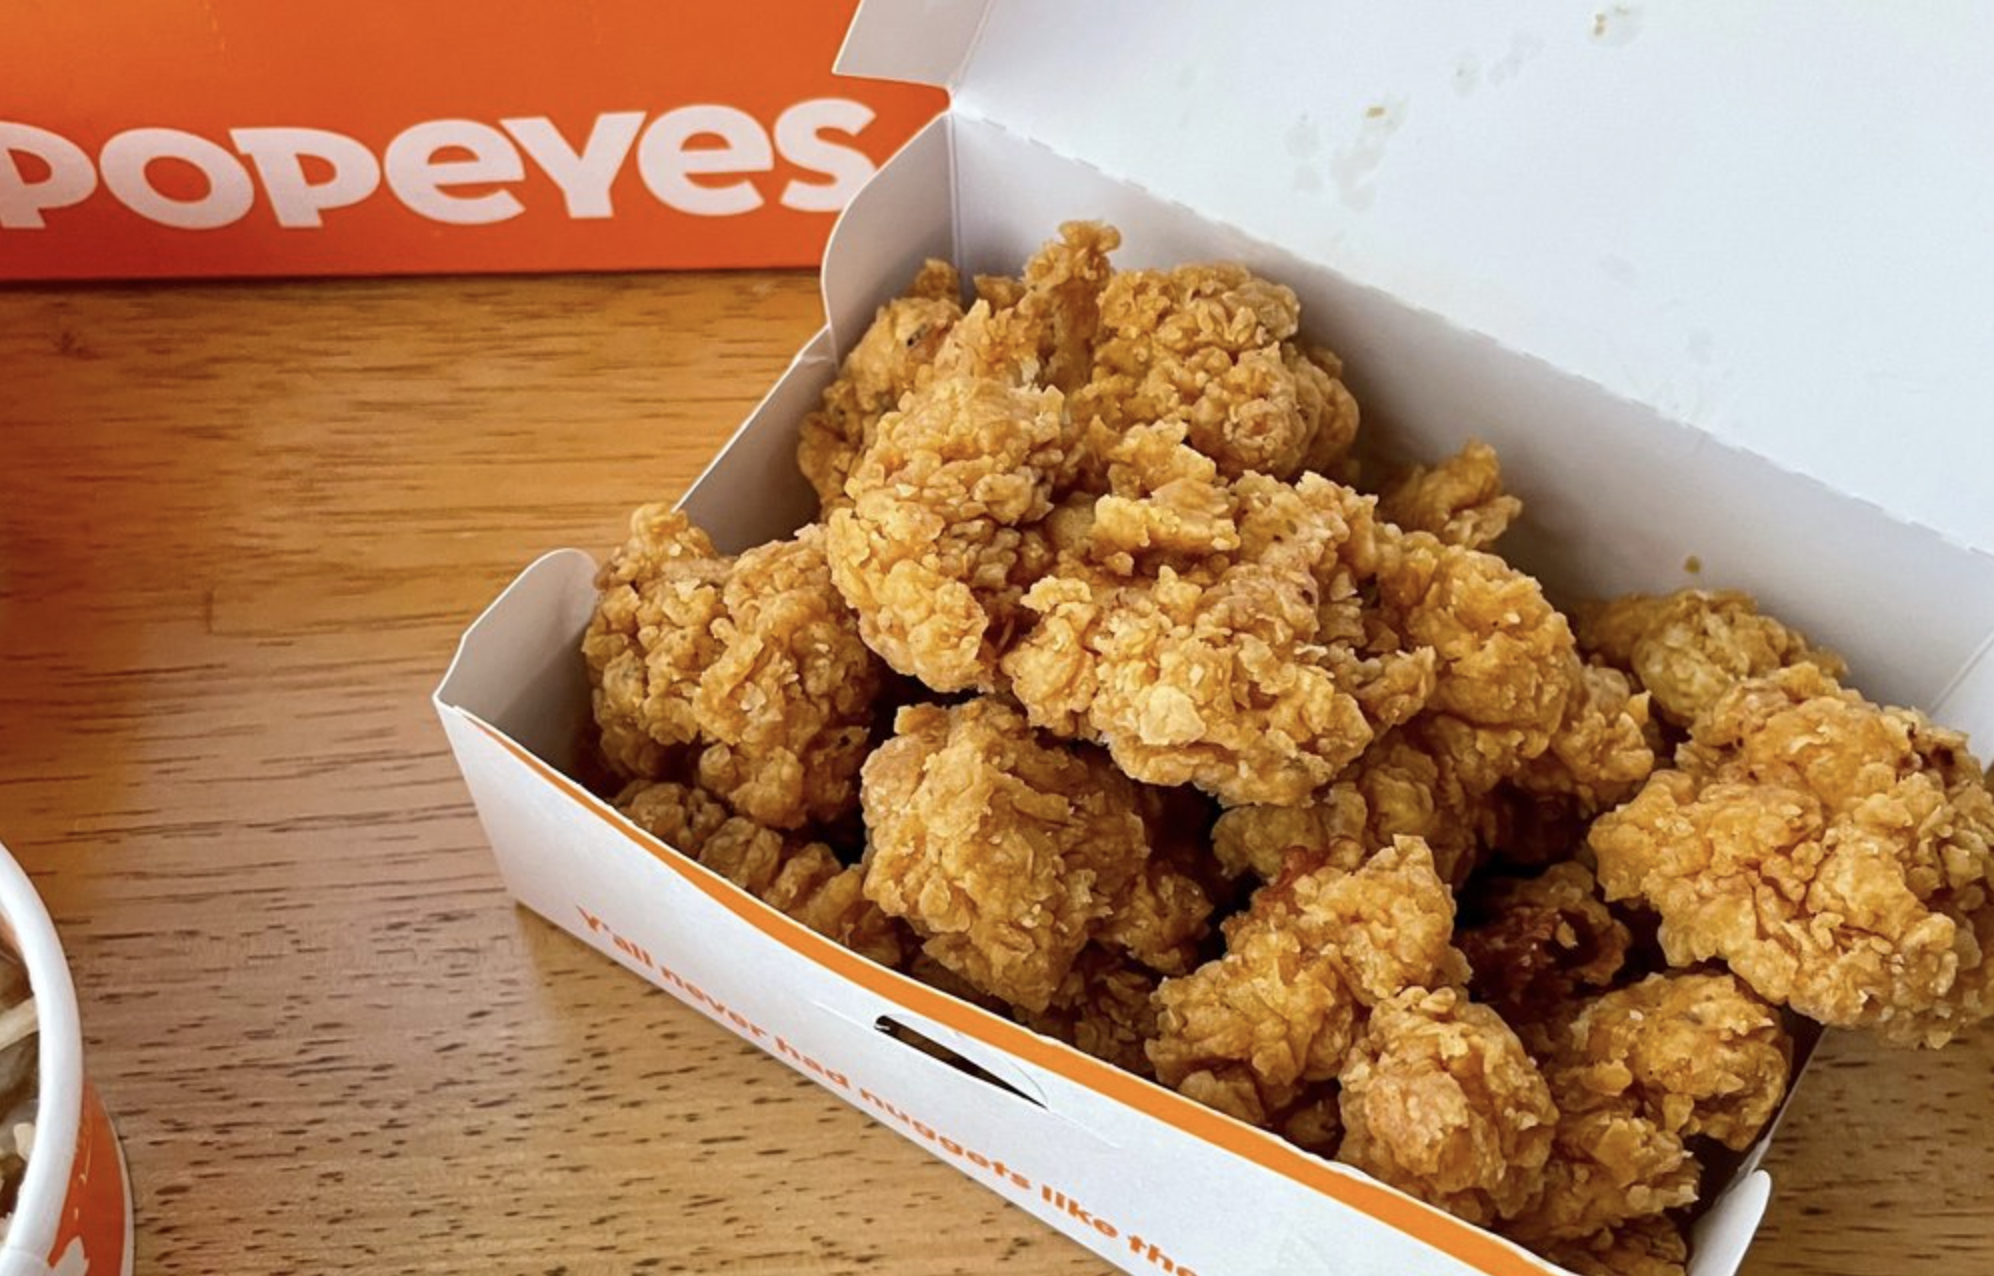 Popeyes Side Dishes: A Shameless Ranking